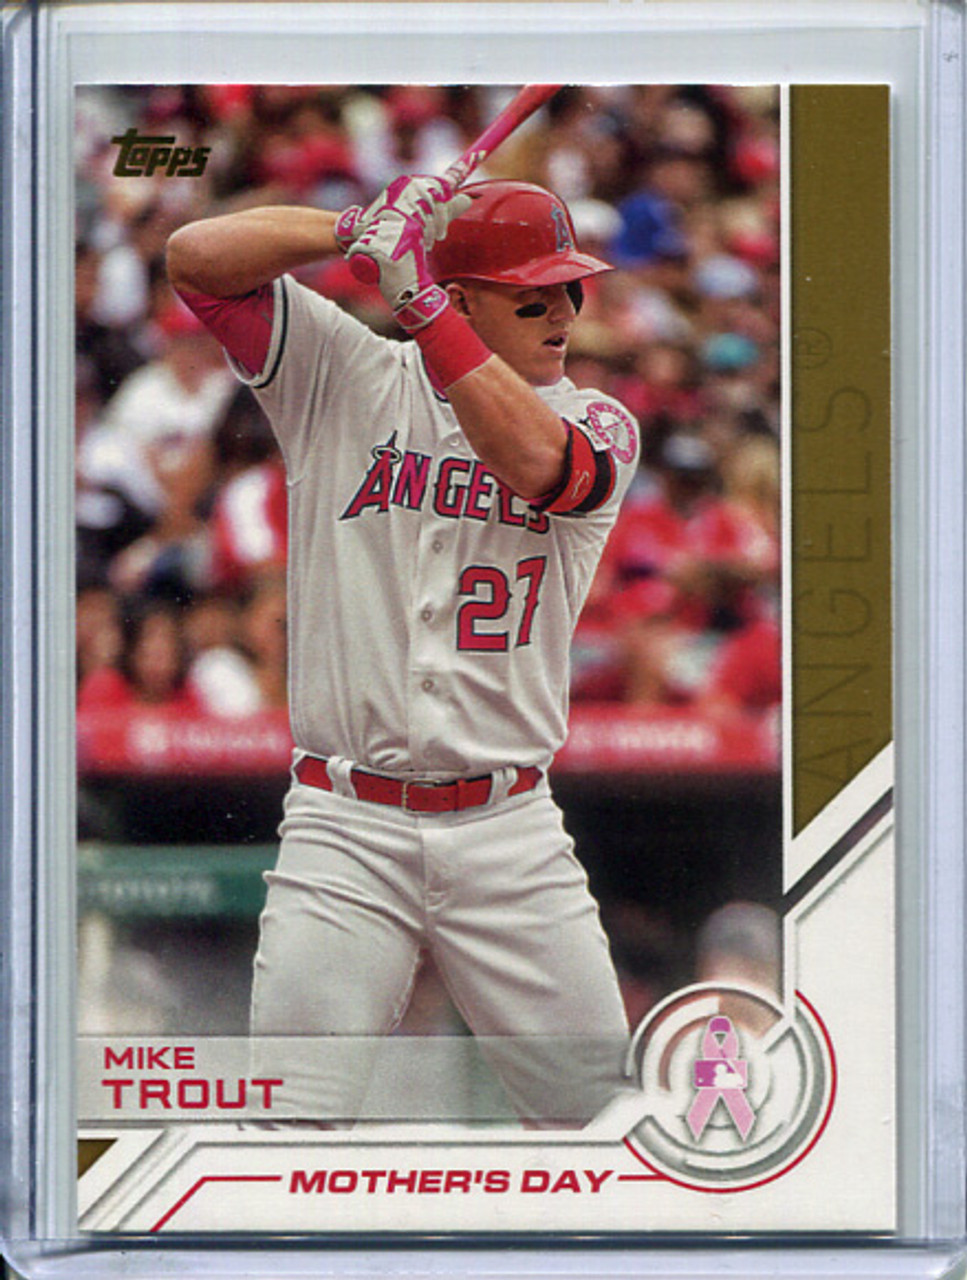 Mike Trout 2017 Topps, Topps Salute Mother's Day #S-25